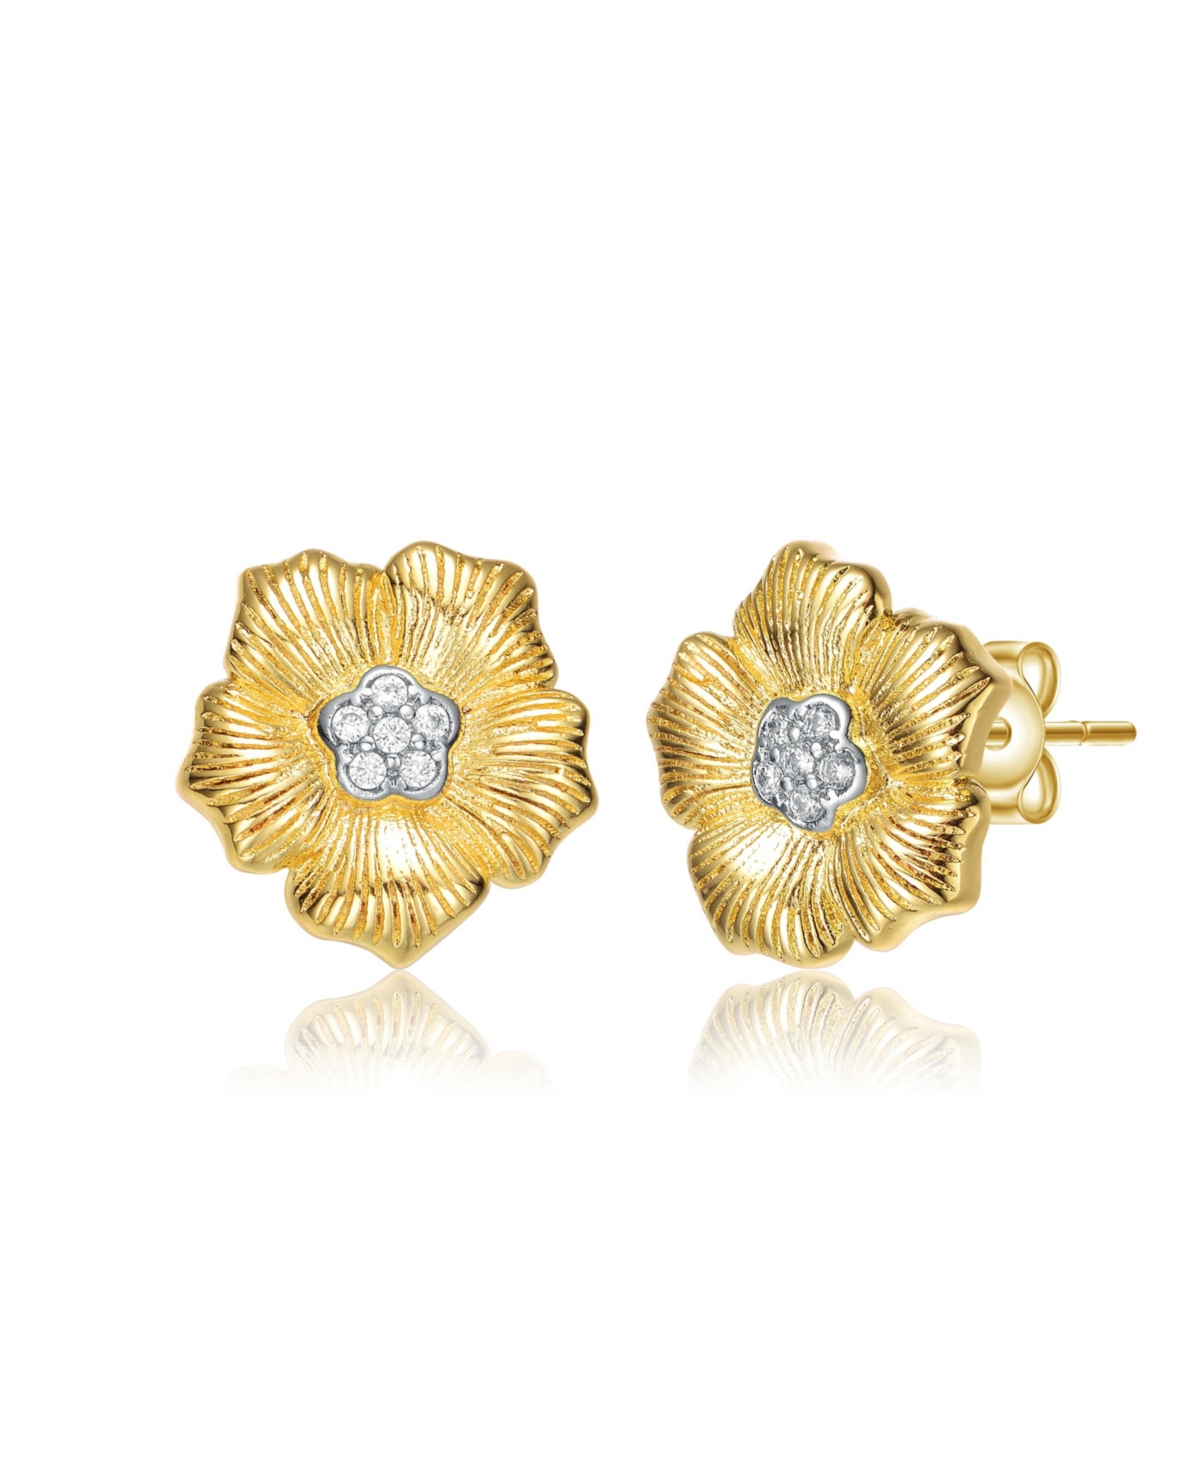 Elegant 14K Gold Plated and Cubic Zirconia Floral Stud Earrings - Gold